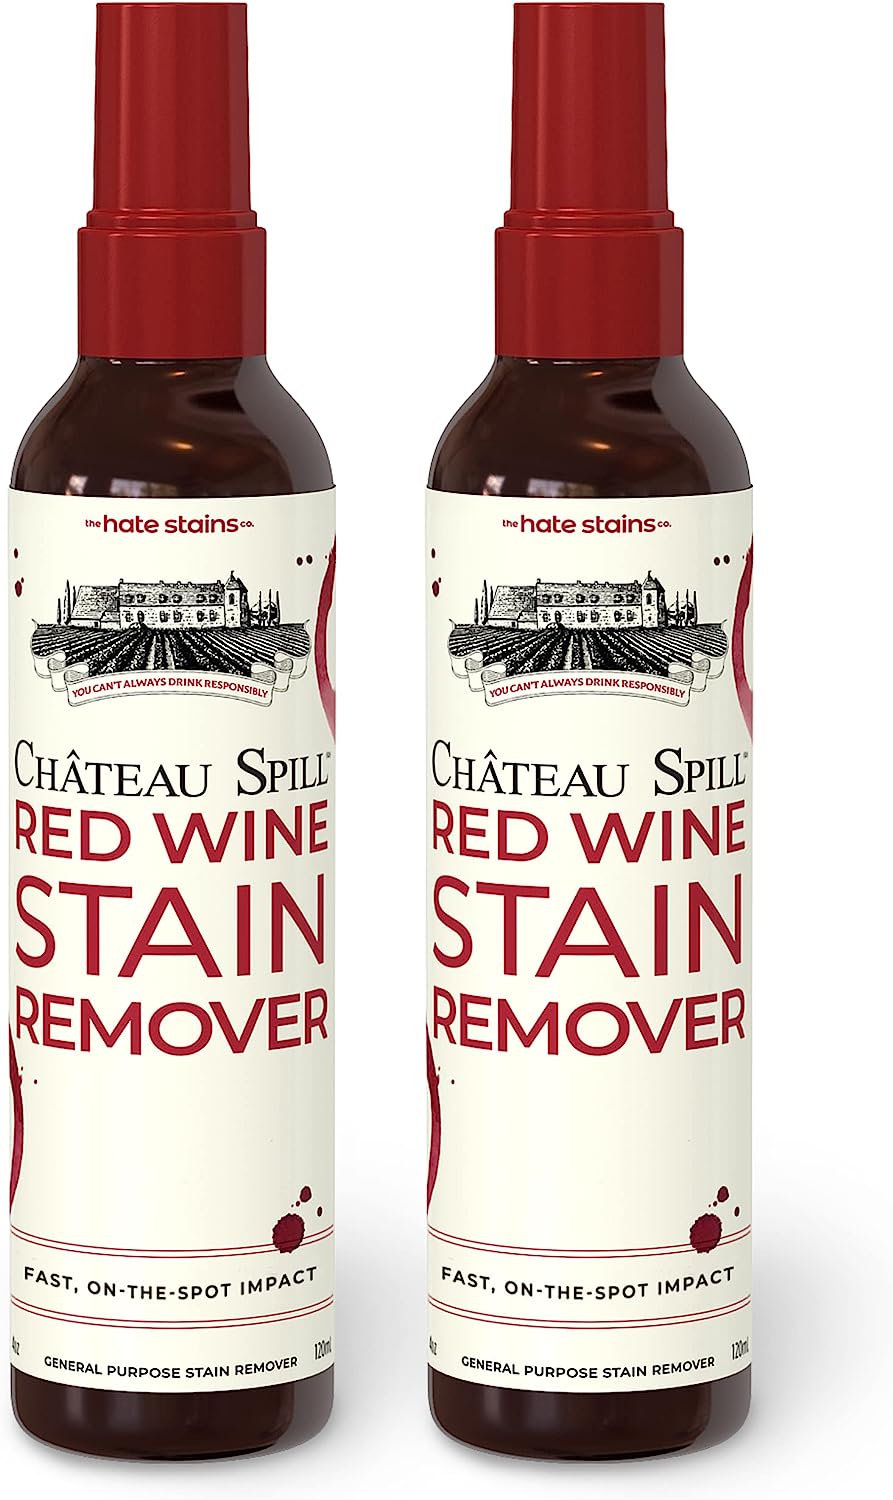 Chateau Spill Red Wine Stain Remover for Clothes – 4oz [...]